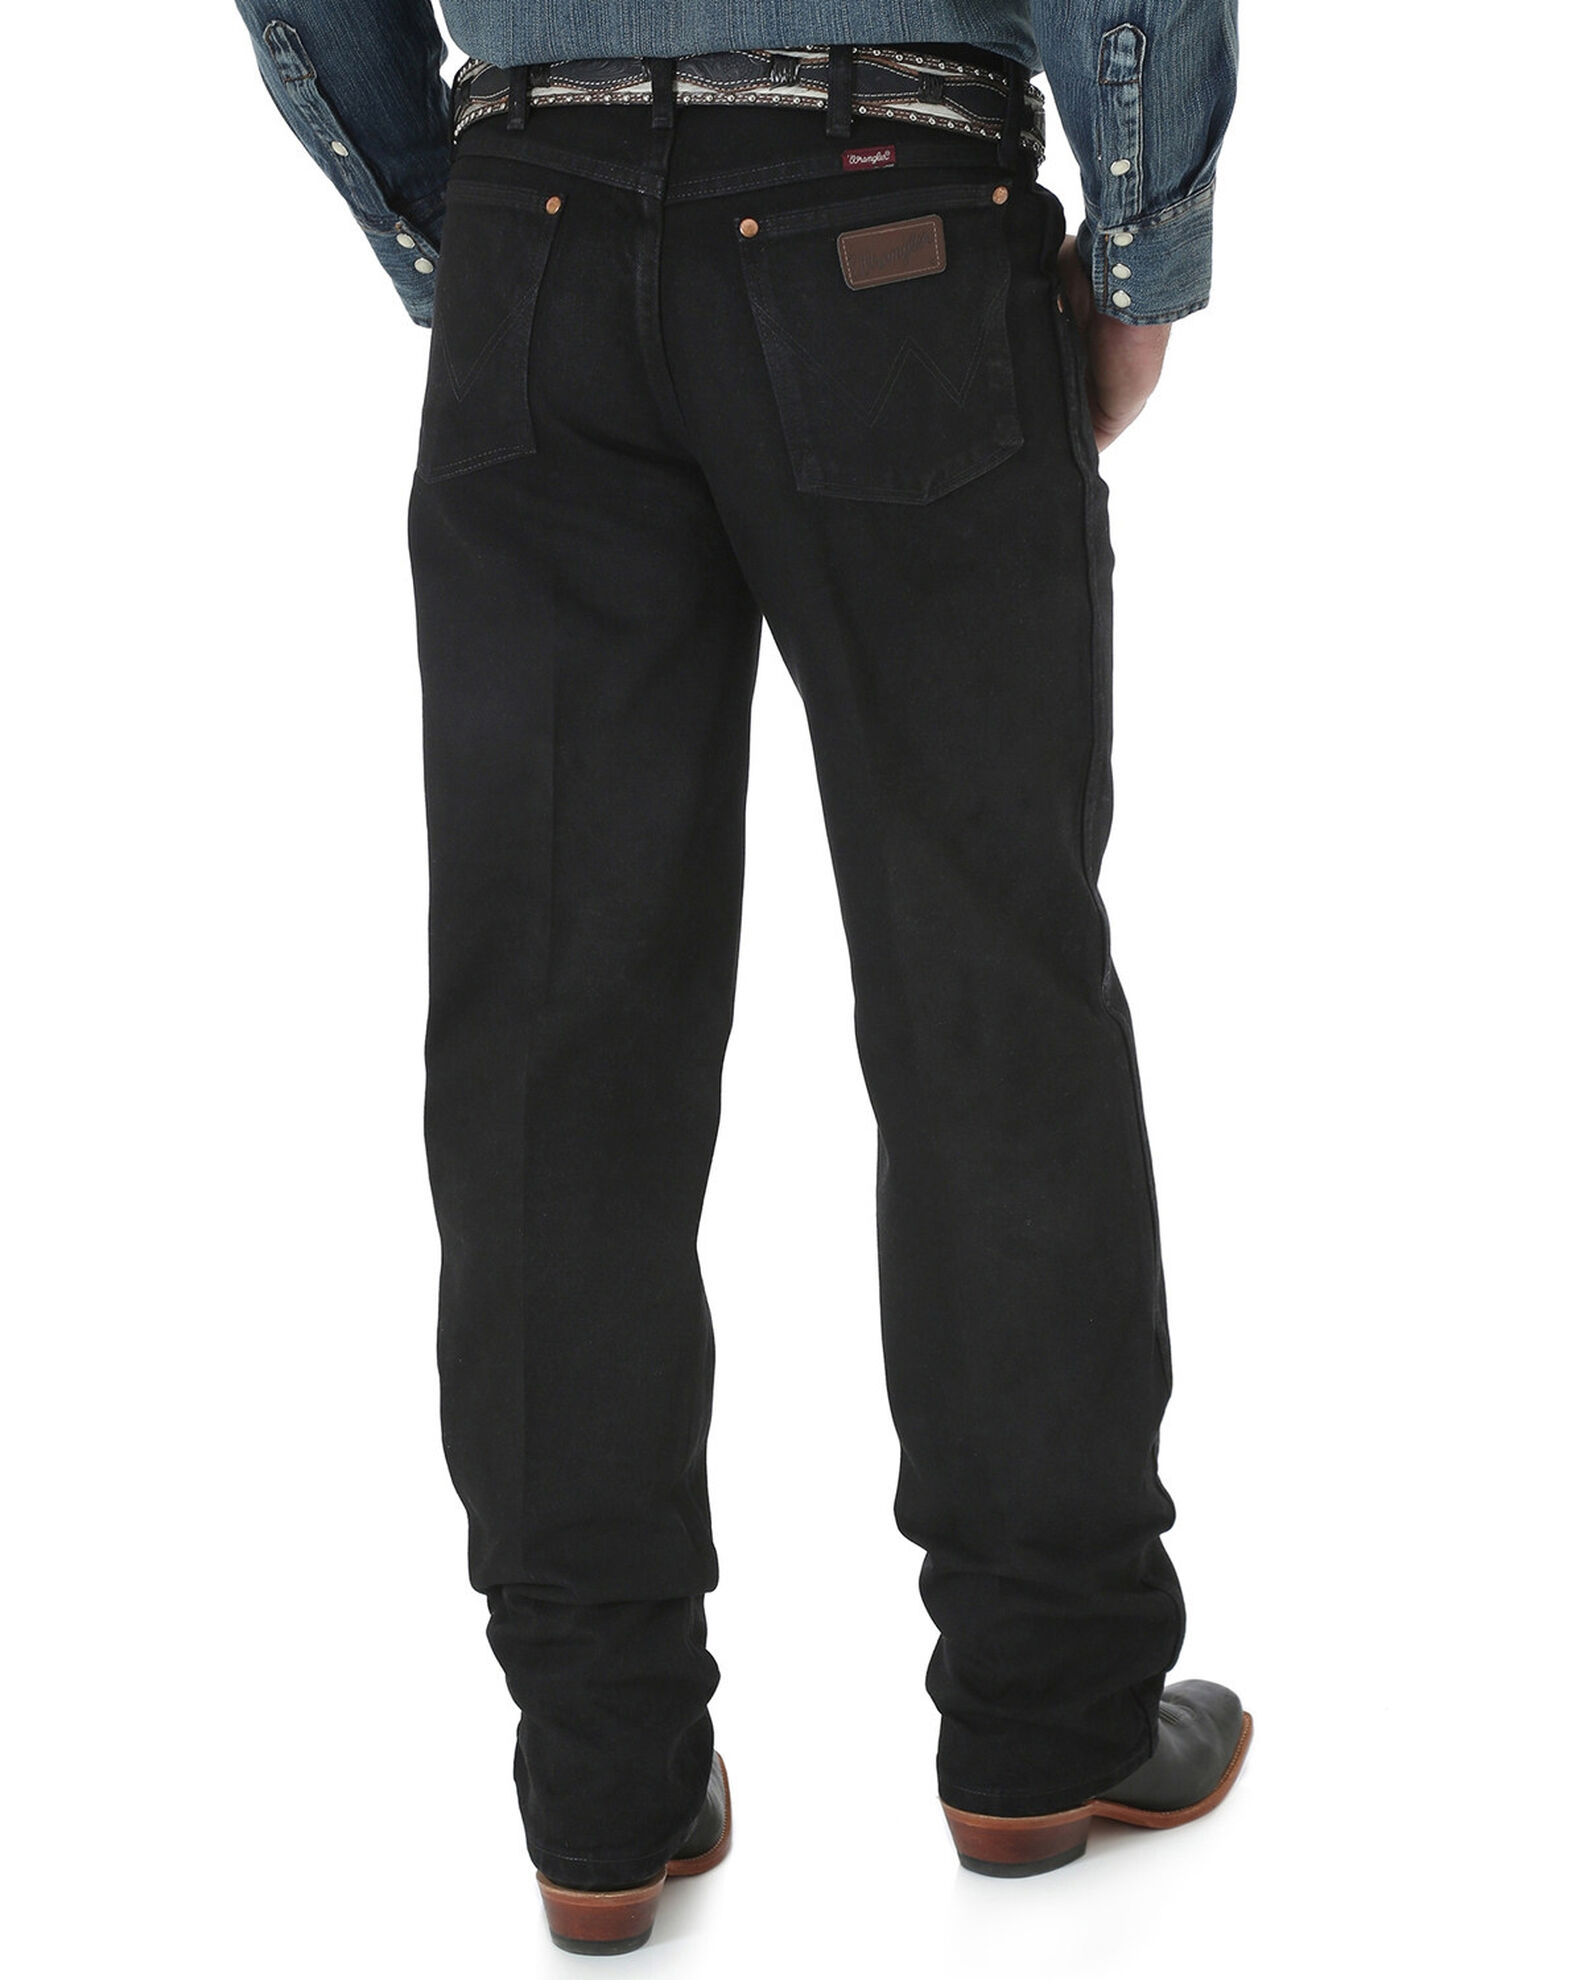 Product Name: Wrangler Cowboy Cut Relaxed Fit Prewashed Jeans - Shadow Black